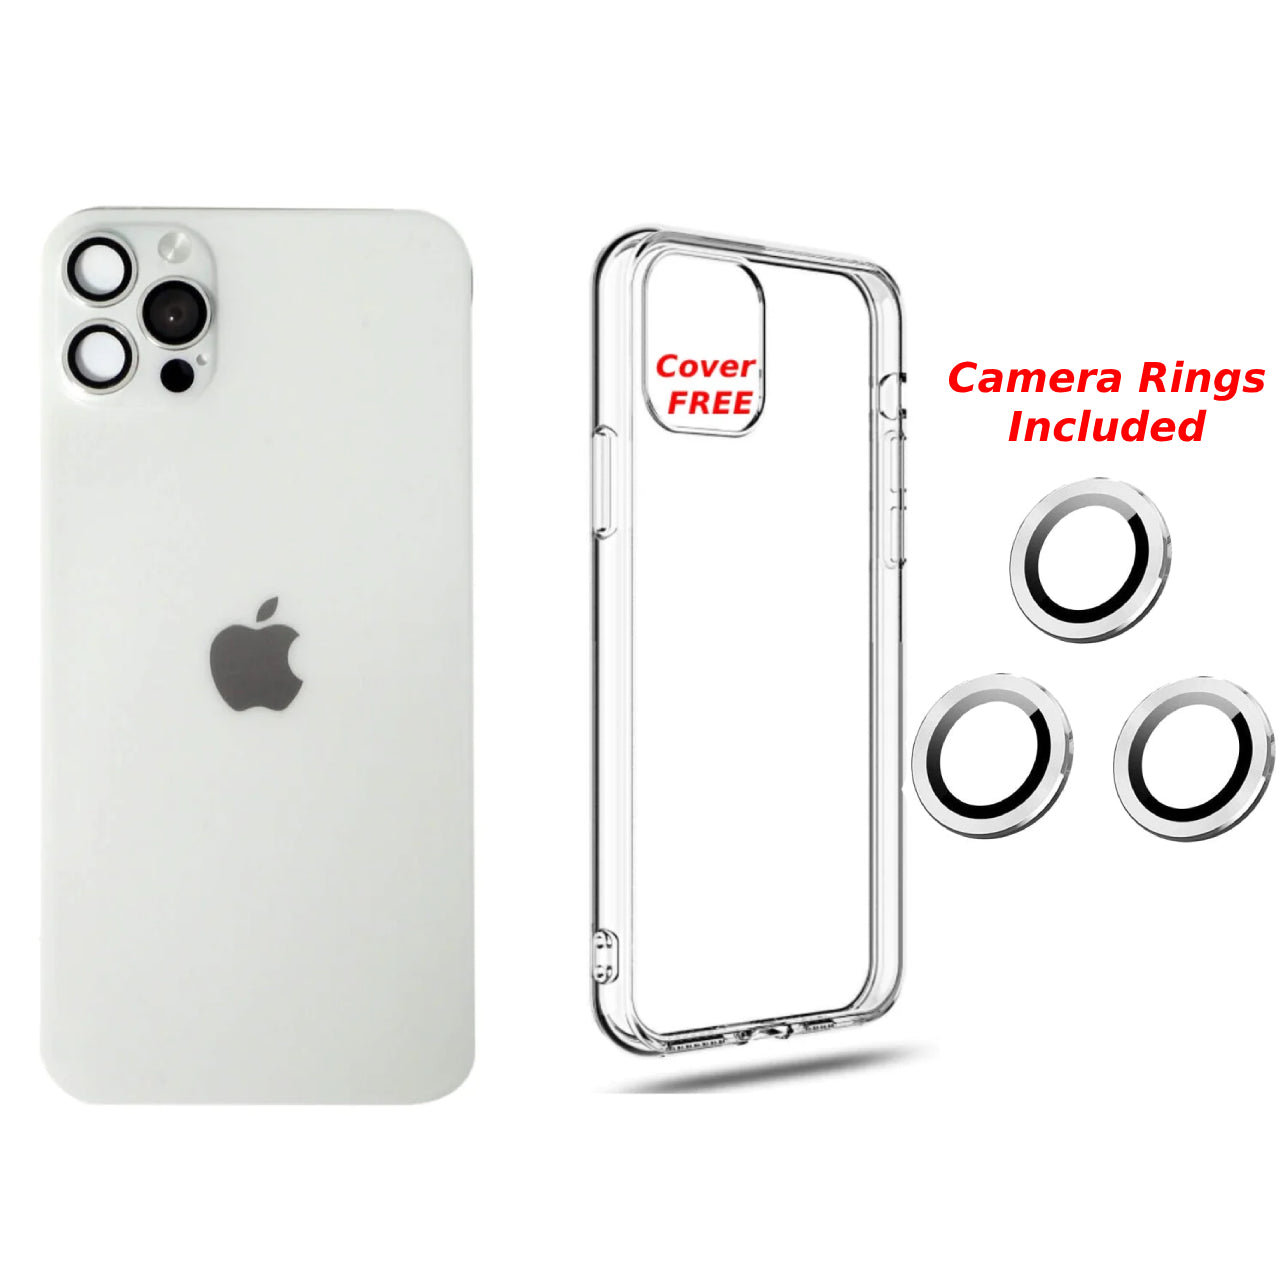 iPhone 12 to iPhone 13 Pro Converter - (Free Cover Included) and CAMERA RINGS